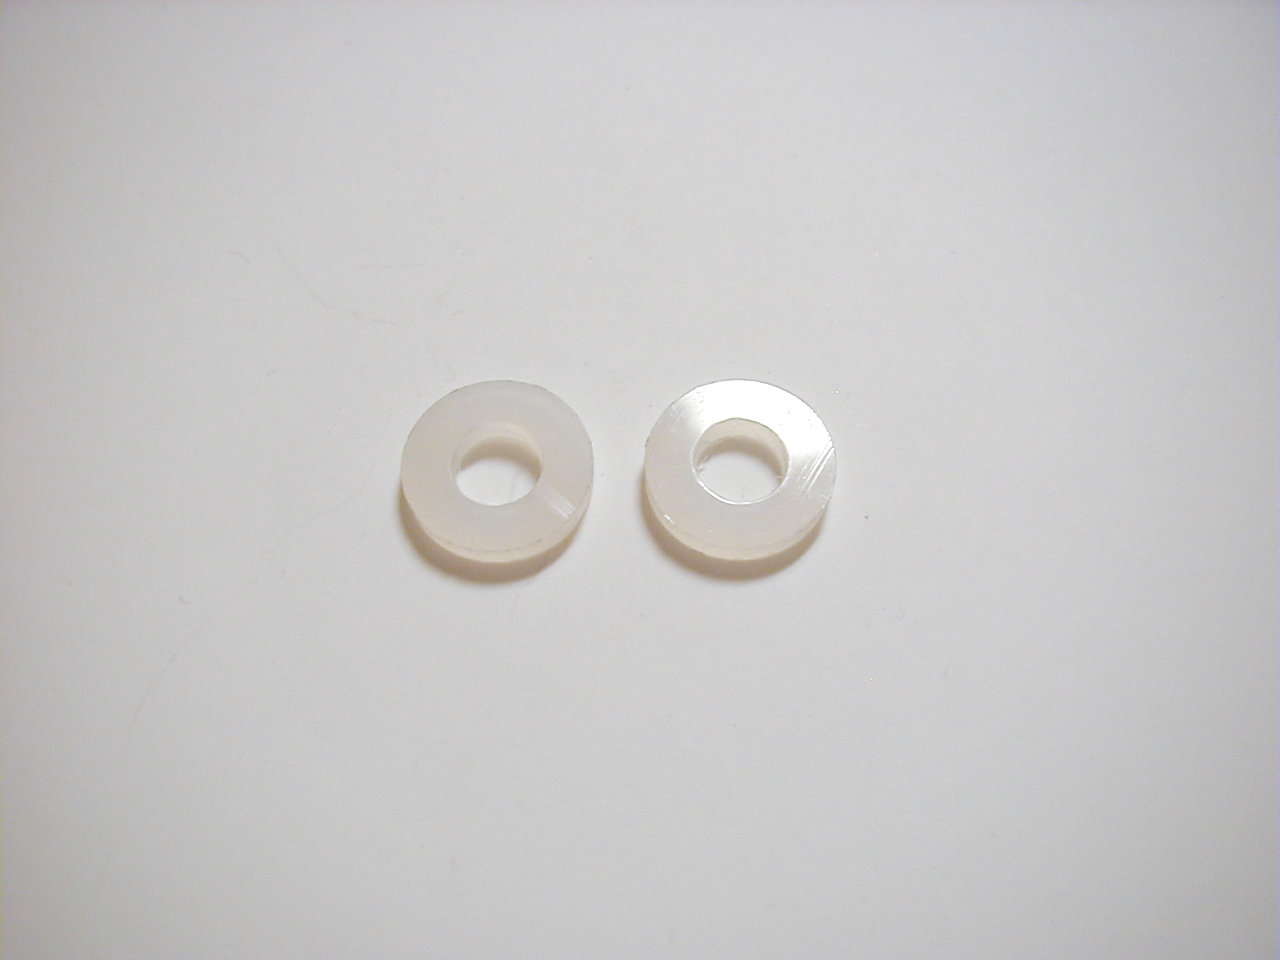 Seat Release Handle Plastic Washers NOS, 1967